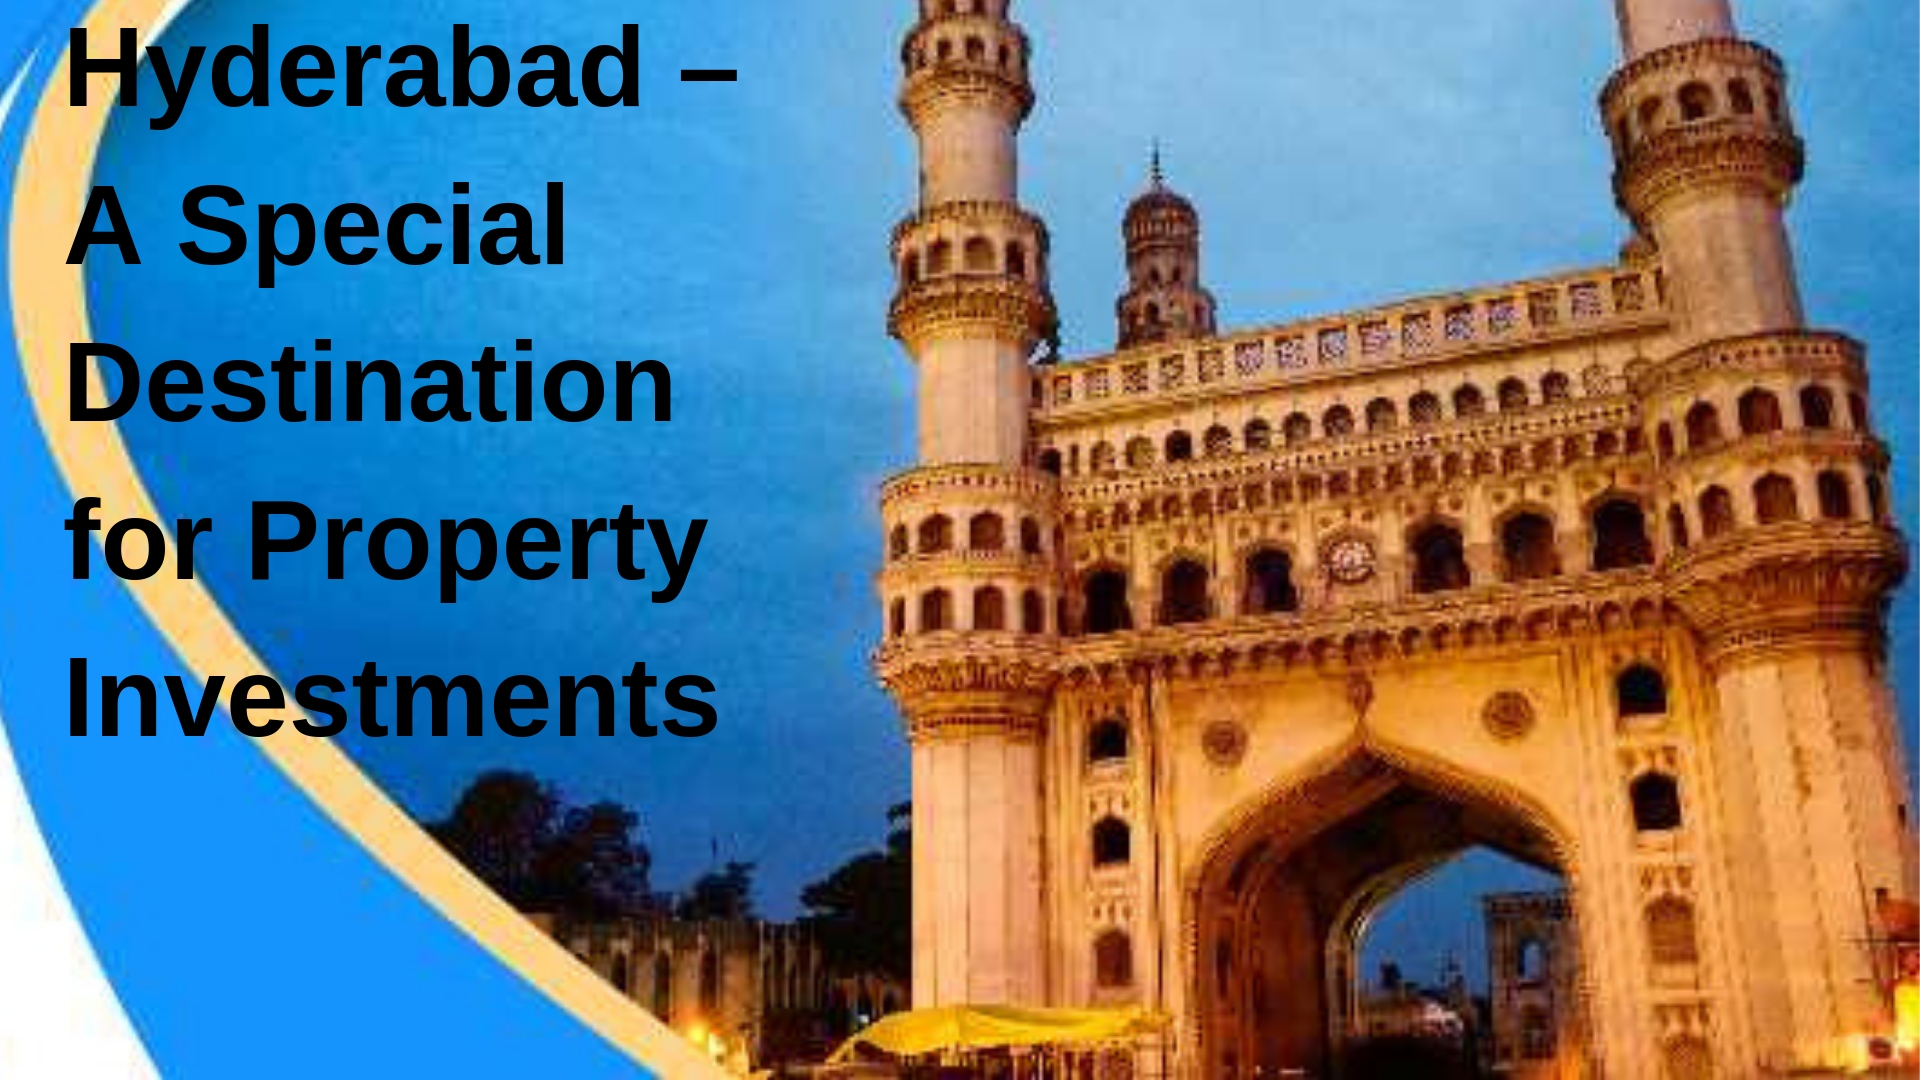 Hyderabad A Special Destination for Property Investments